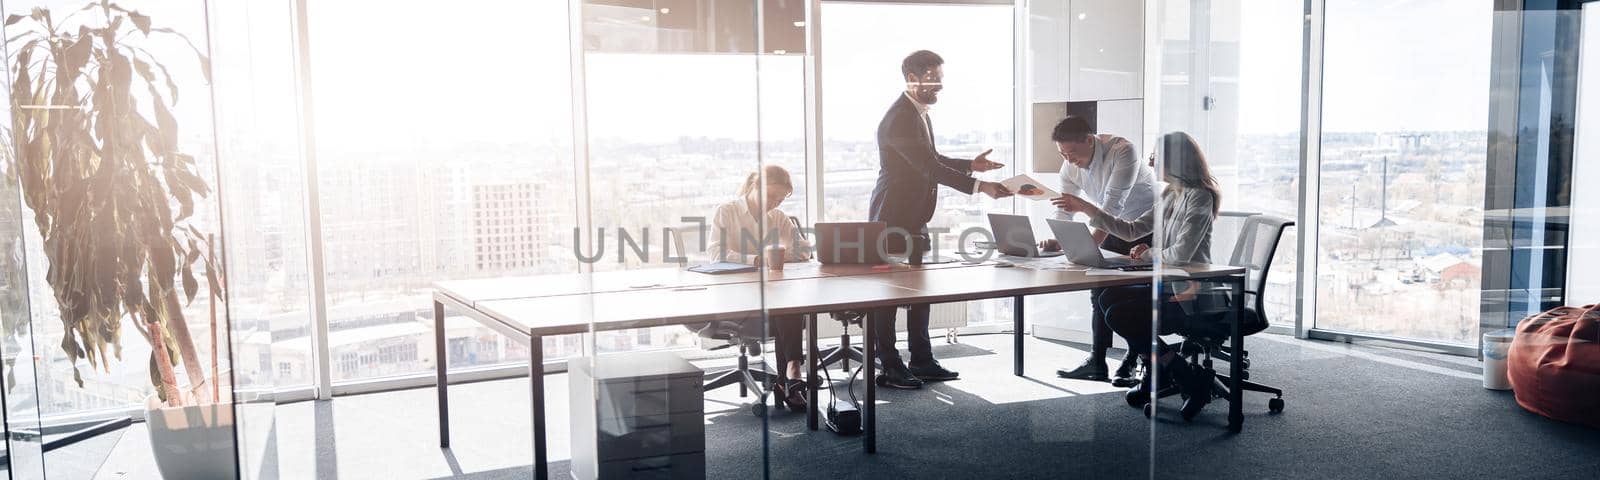 People standing near table, team of young businessmen working and communicating together in office by Yaroslav_astakhov